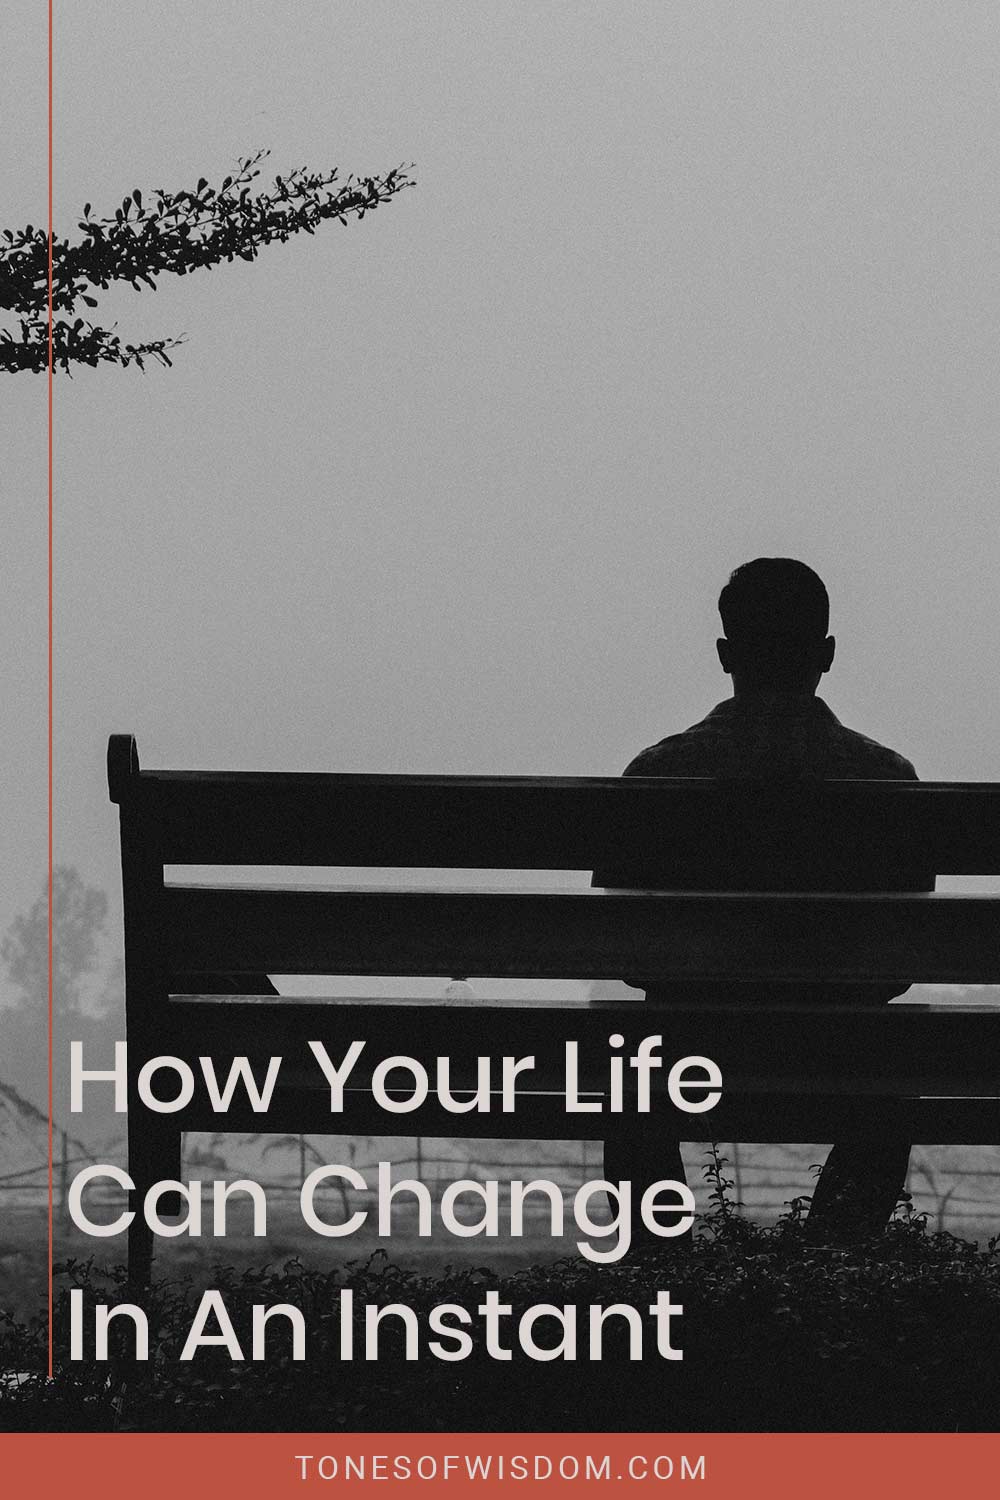 Man sitting on a bench - How Your Life Can Change In An Instant?